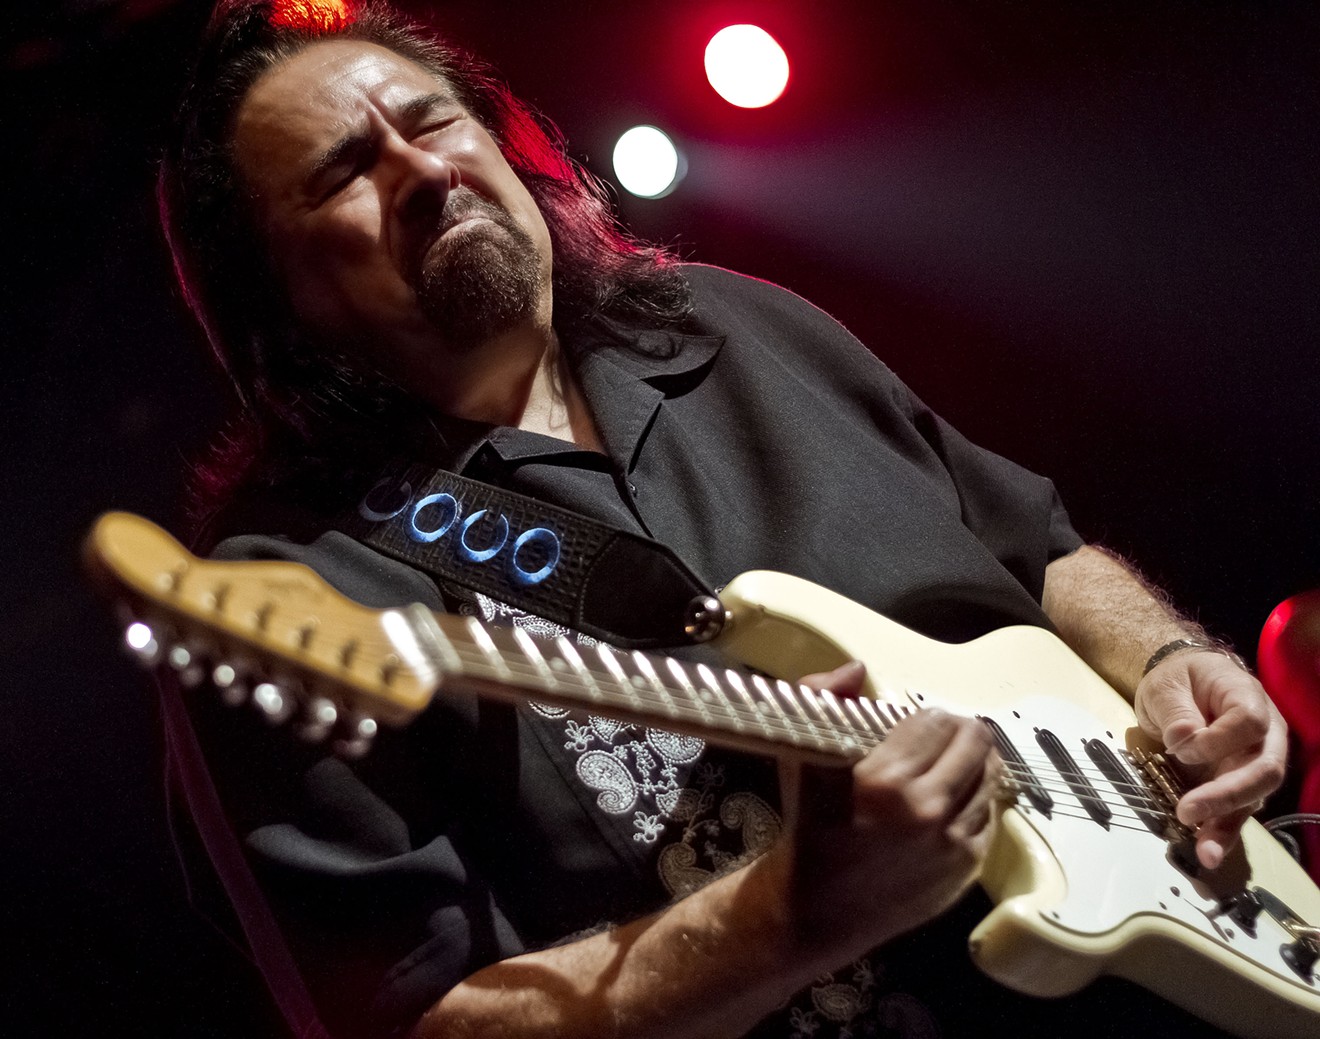 Coco Montoya's lifelong path to the blues began at a...Iron Butterfly concert?